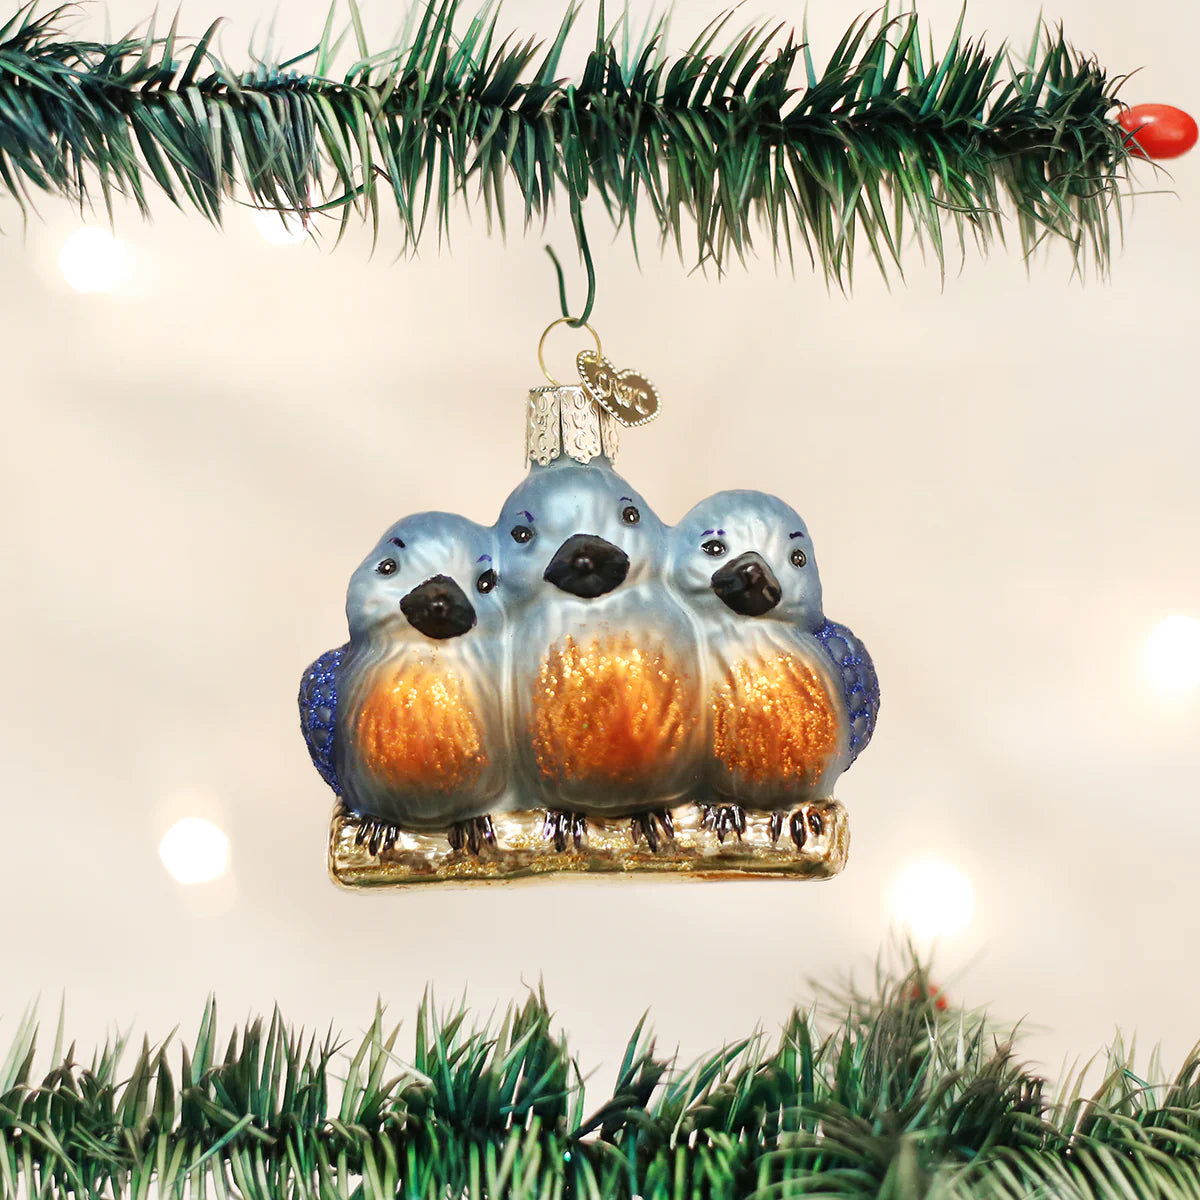 Old World Christmas - Feathered Friends Ornament